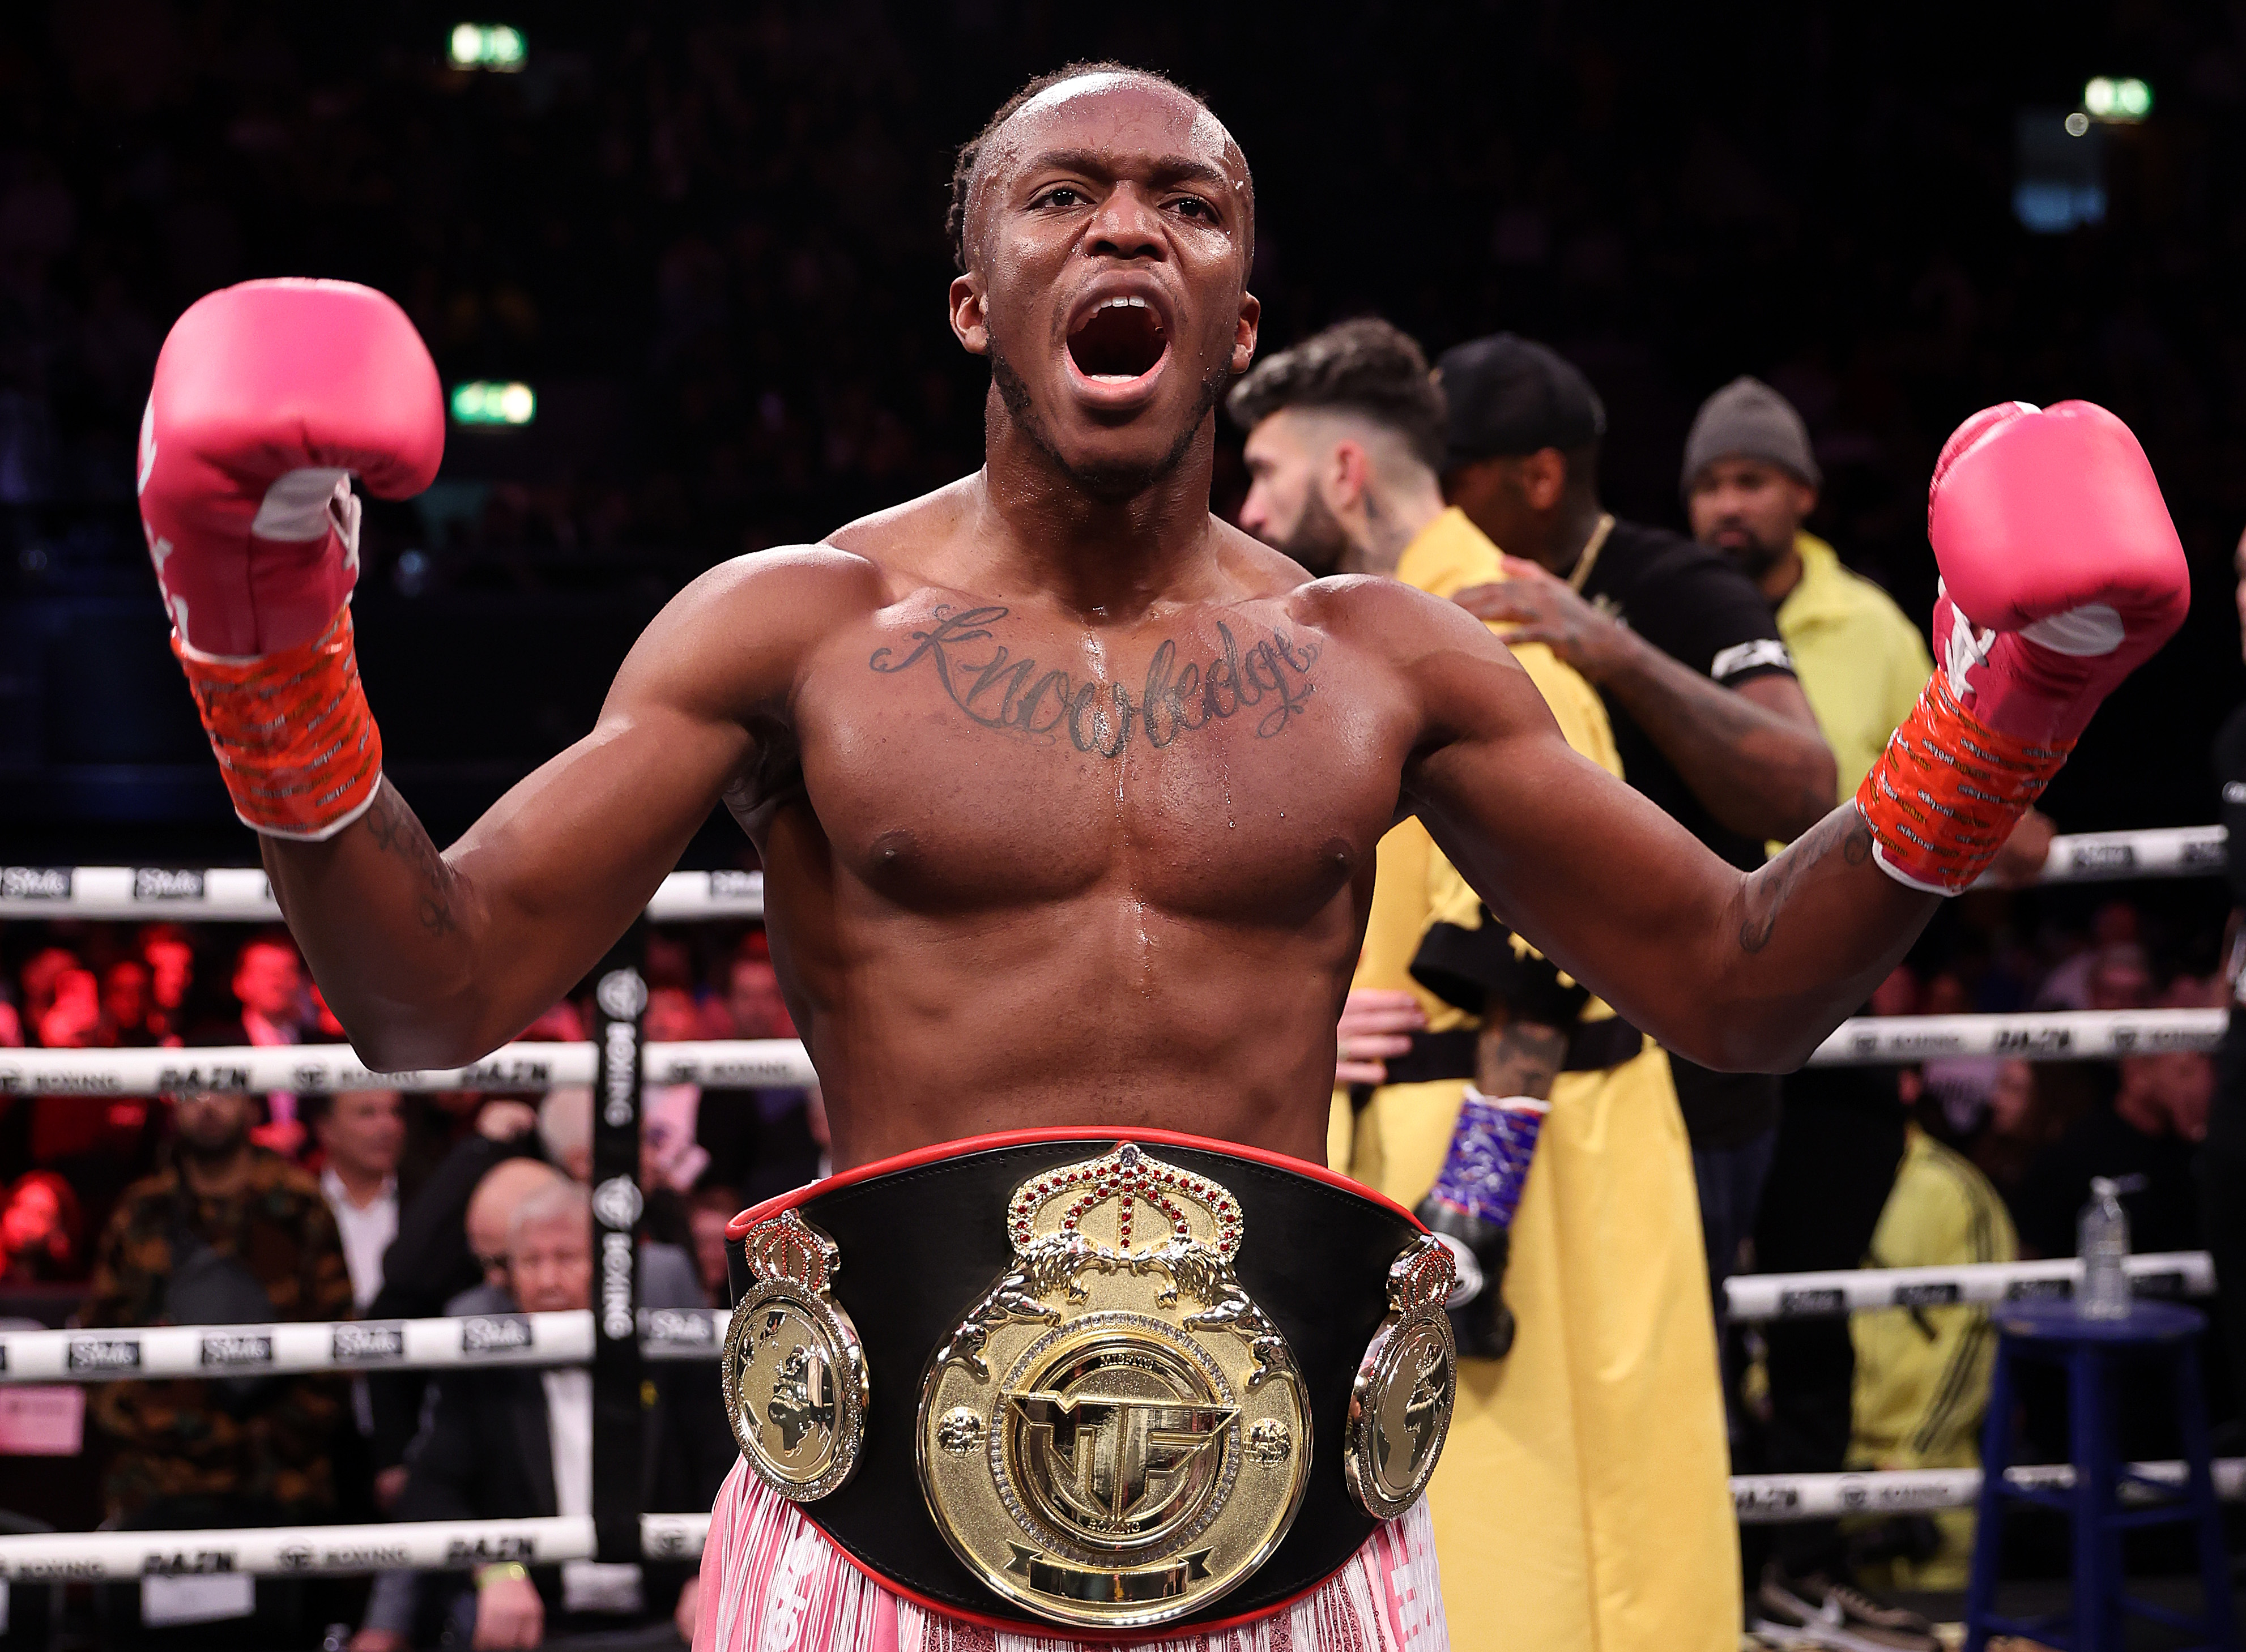 KSI and Misfits Boxing are getting a lot of things right that standard boxing promoters could learn from